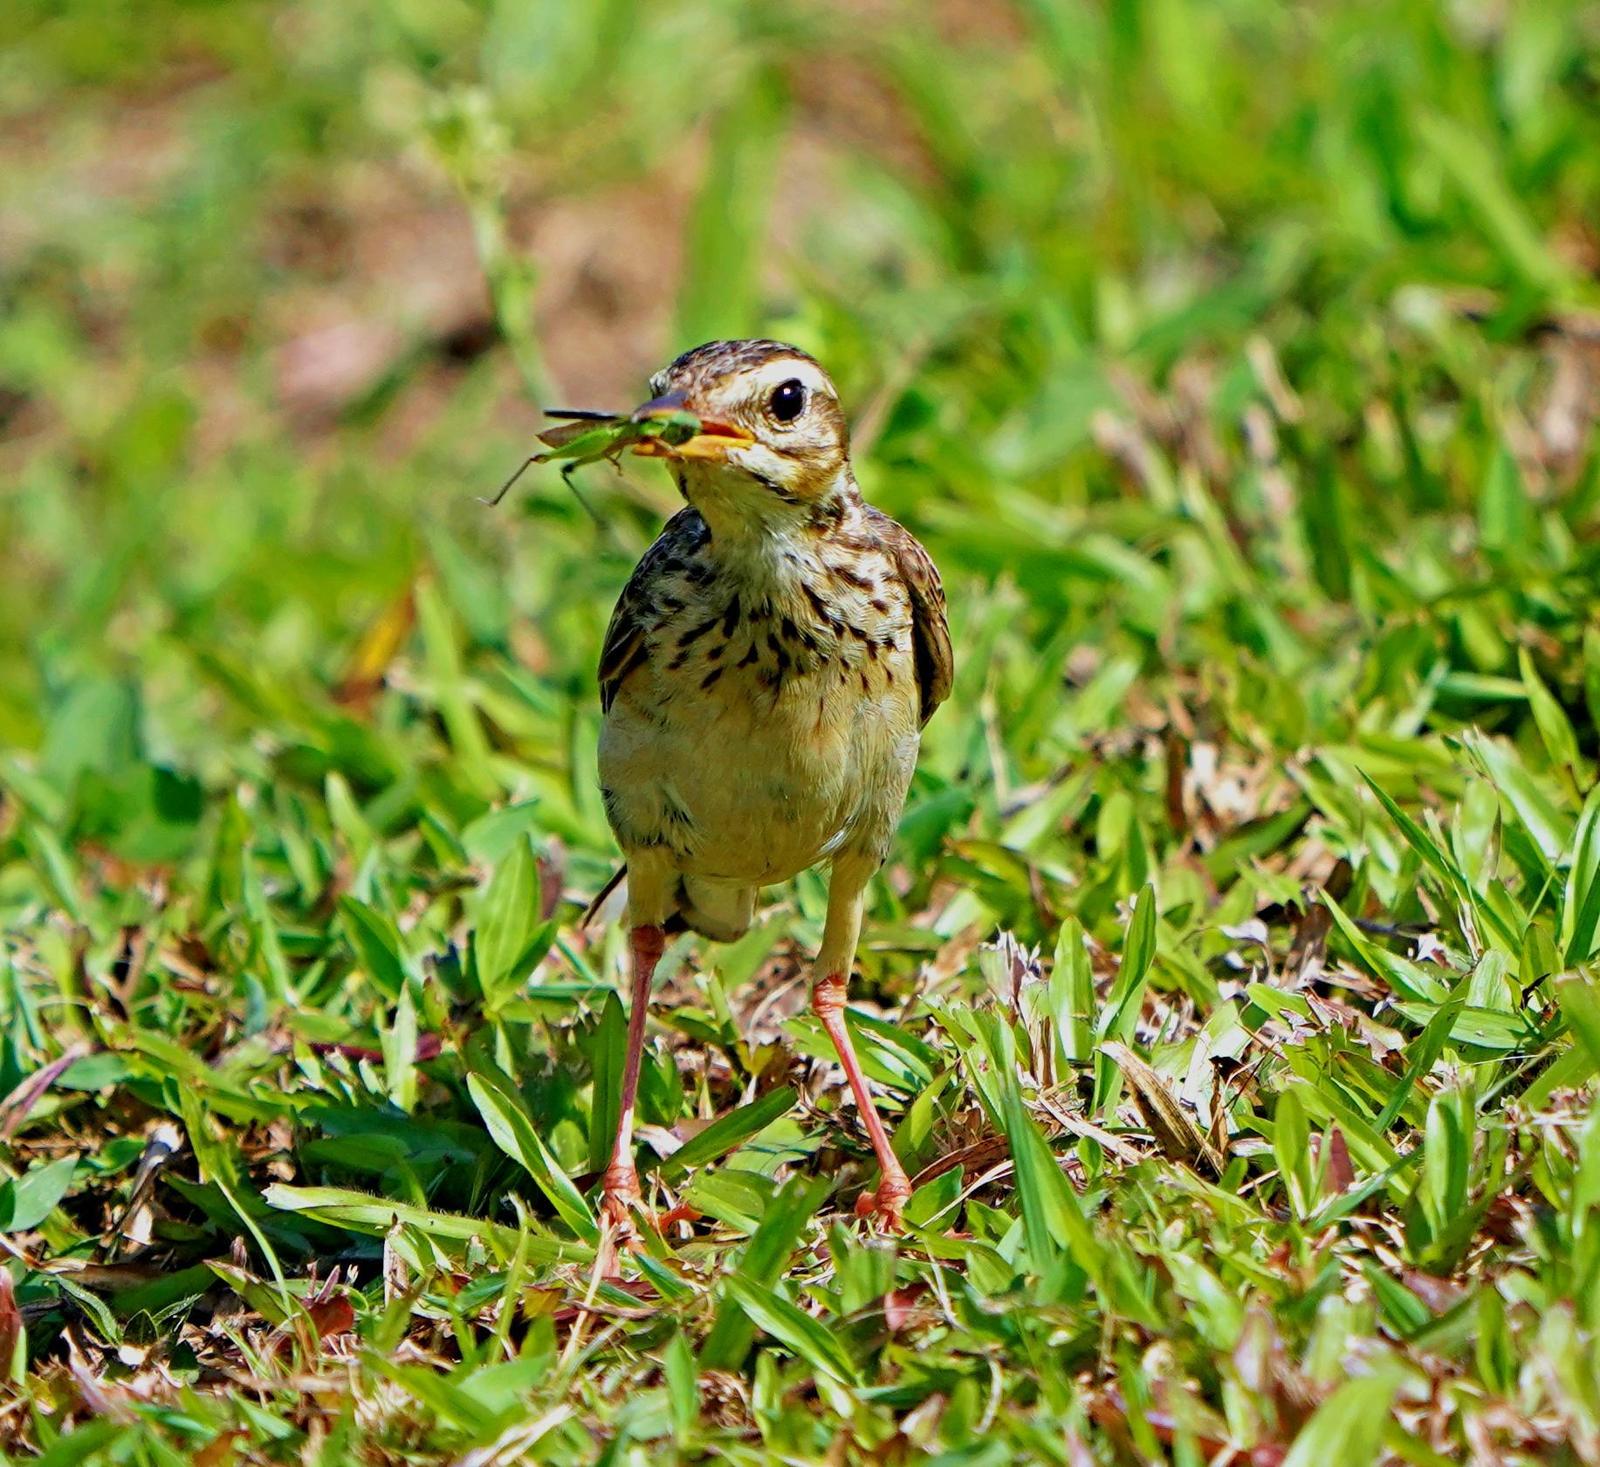 Paddyfield Pipit Photo by Steven Cheong